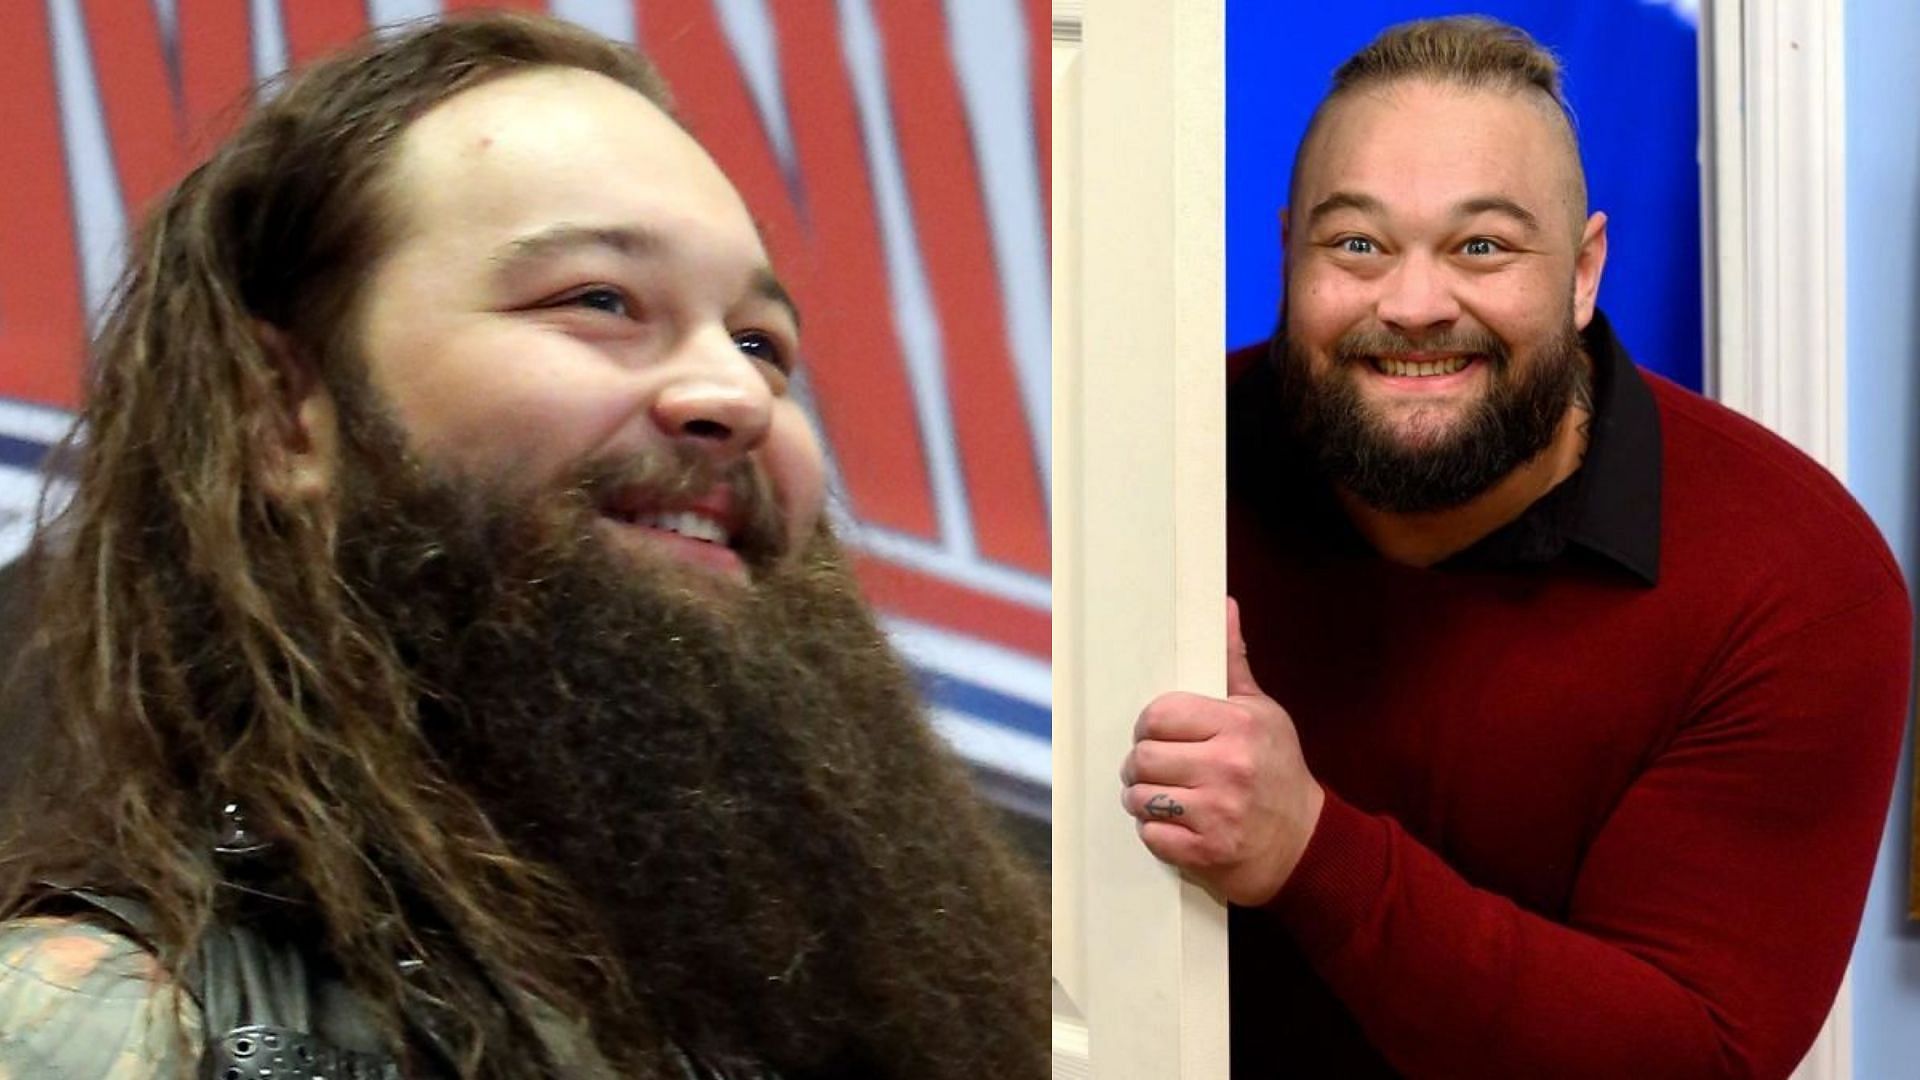 WWE wrestlers and fans celebrated Bray Wyatt on SmackDown.